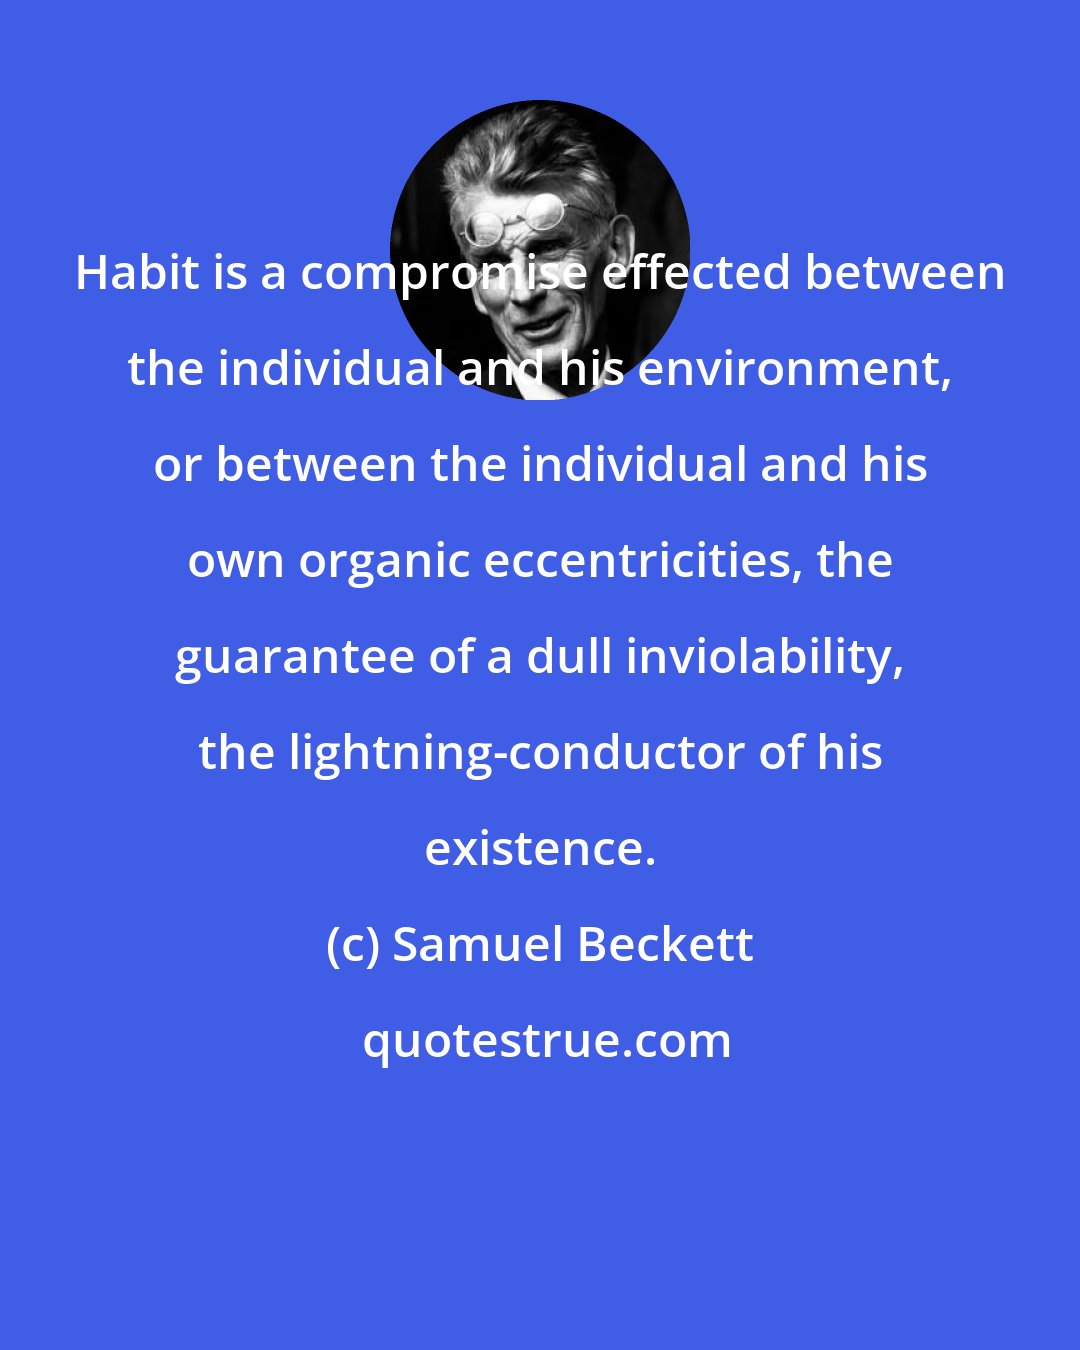 Samuel Beckett: Habit is a compromise effected between the individual and his environment, or between the individual and his own organic eccentricities, the guarantee of a dull inviolability, the lightning-conductor of his existence.